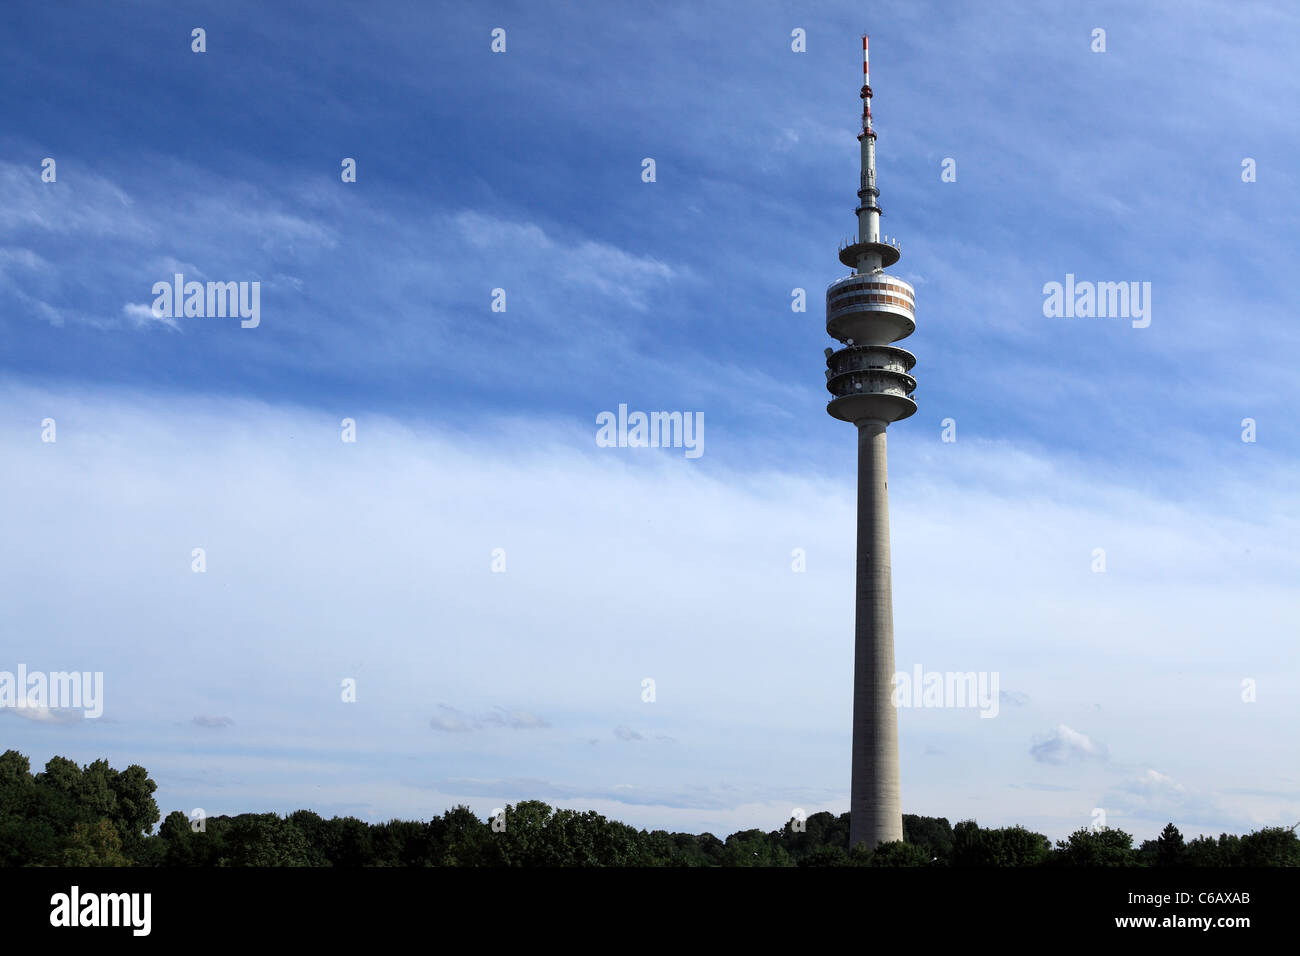 The Olympic Tower (Olympiaturm), the television tower (Fernsehturm), in the Olympic Park in Munich, Bavaria, Germany. Stock Photo